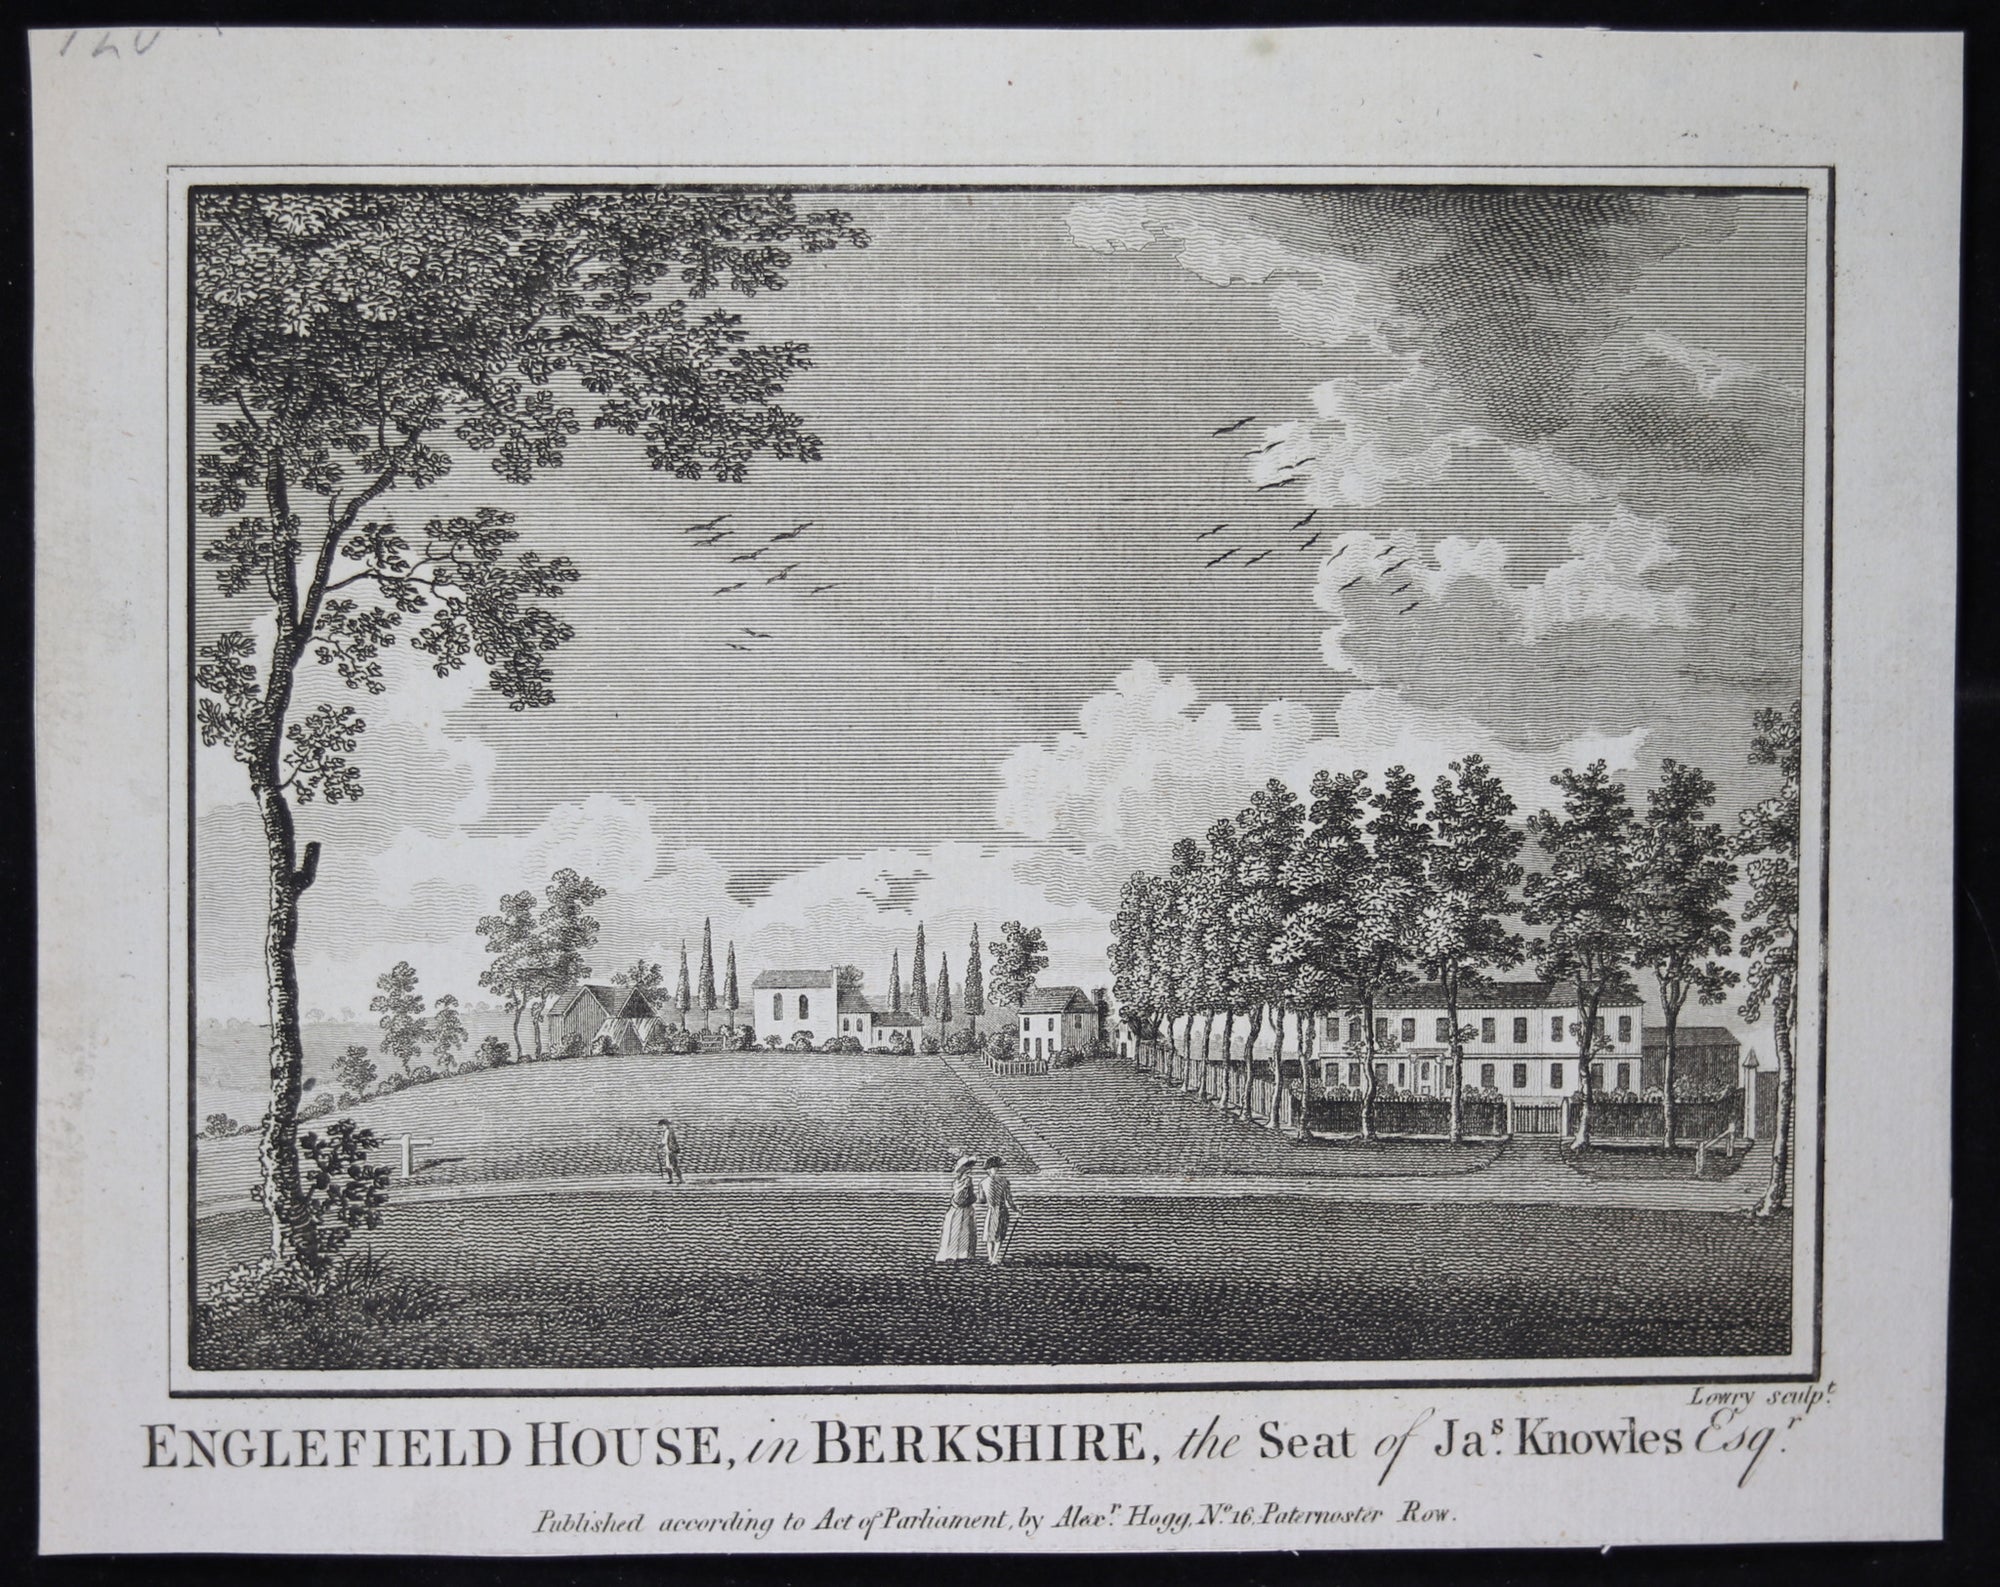 Print ‘Englefield House in Berkshire, the seat of Jas Knowles’ @1790